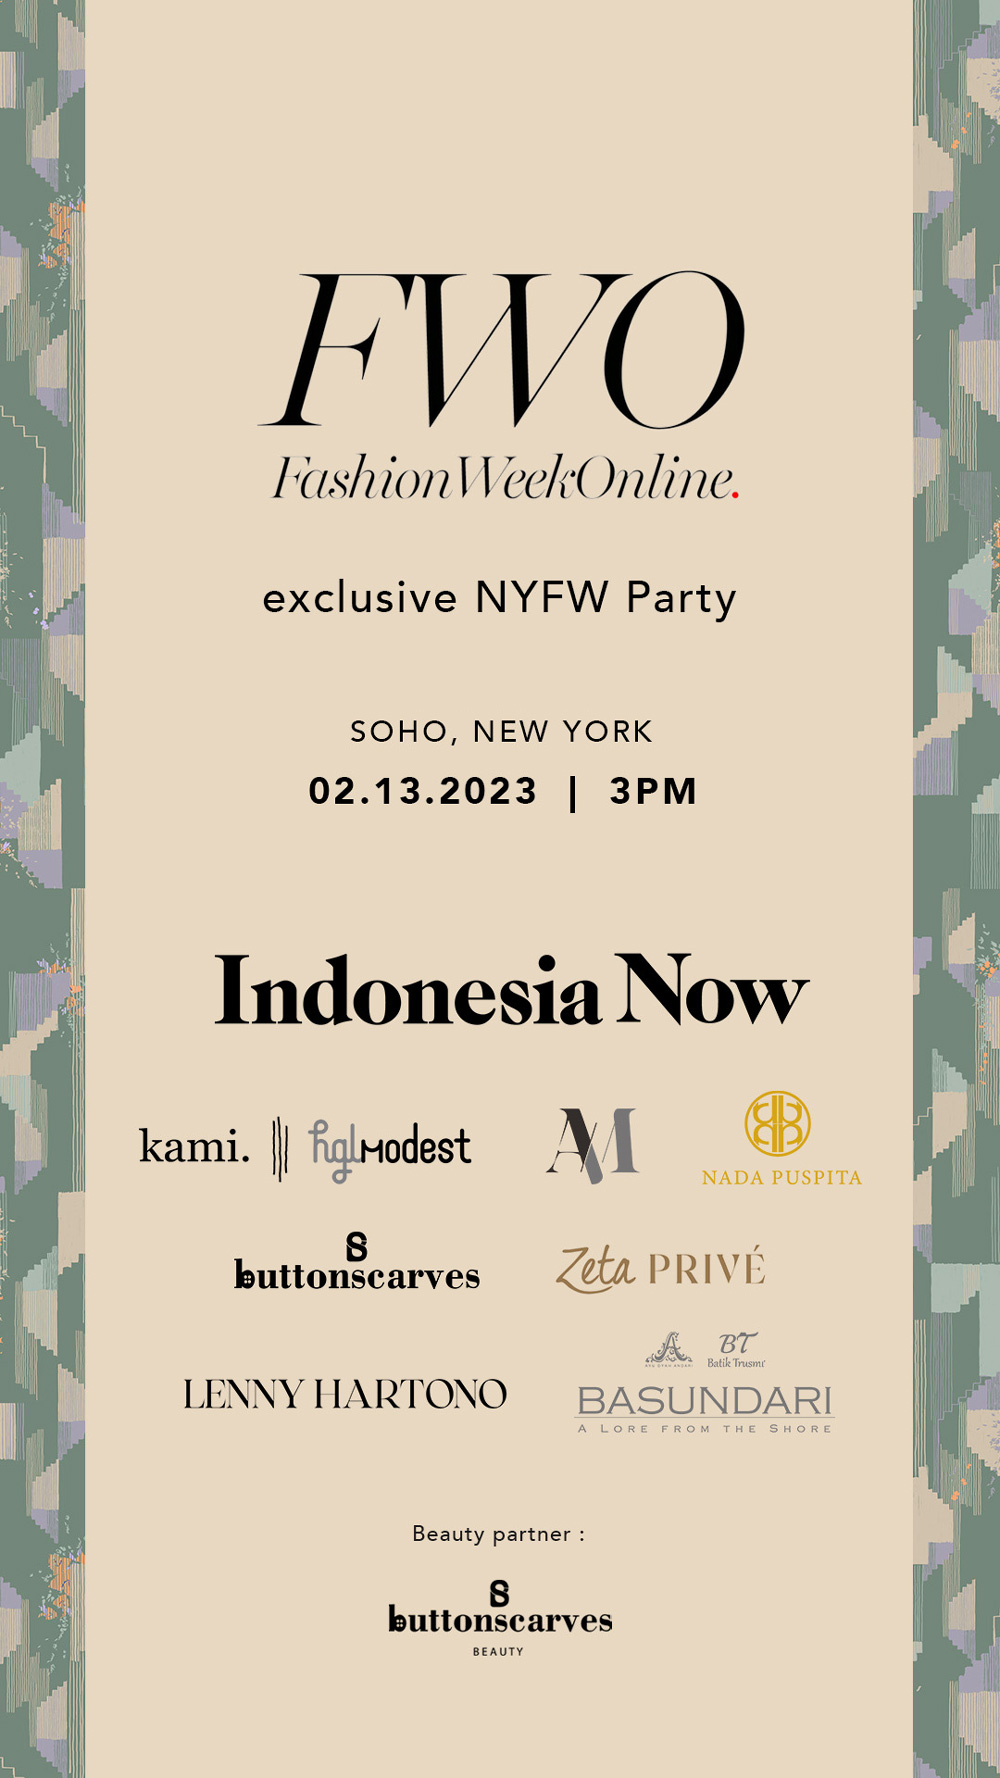 Fashion Week Online Members-Only Event